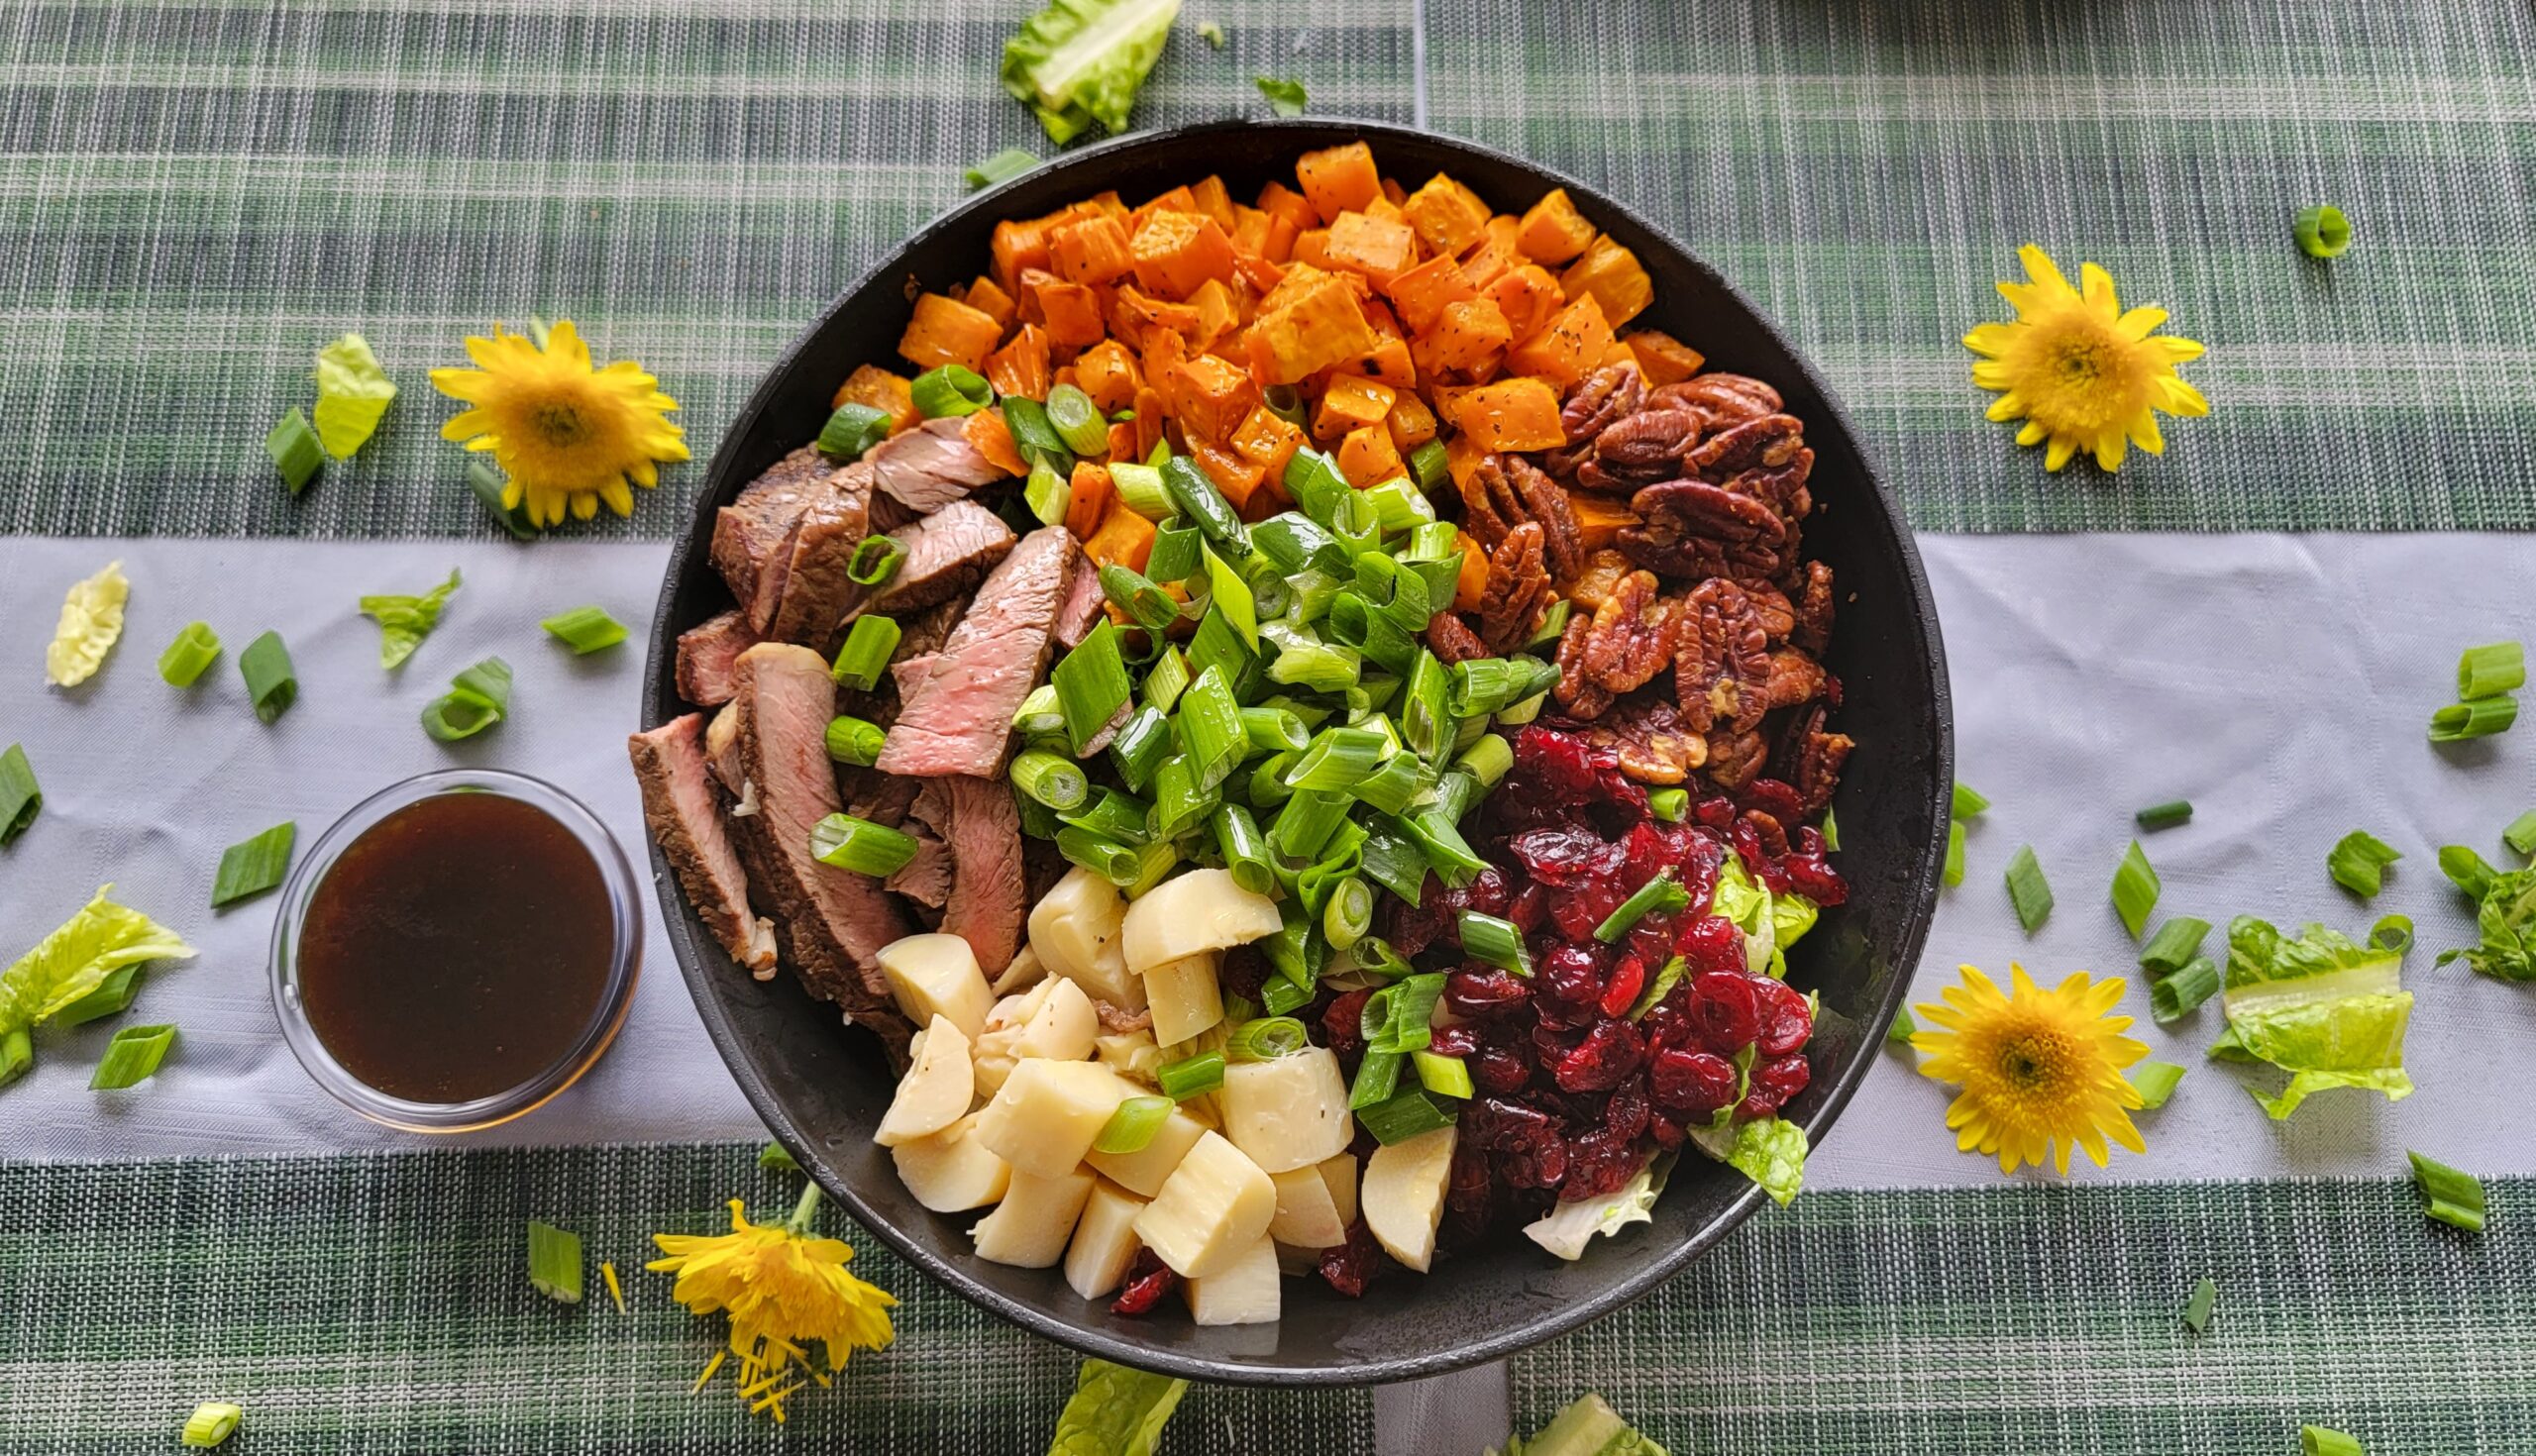 Grilled Steak Salad with Roasted Sweet Potatoes